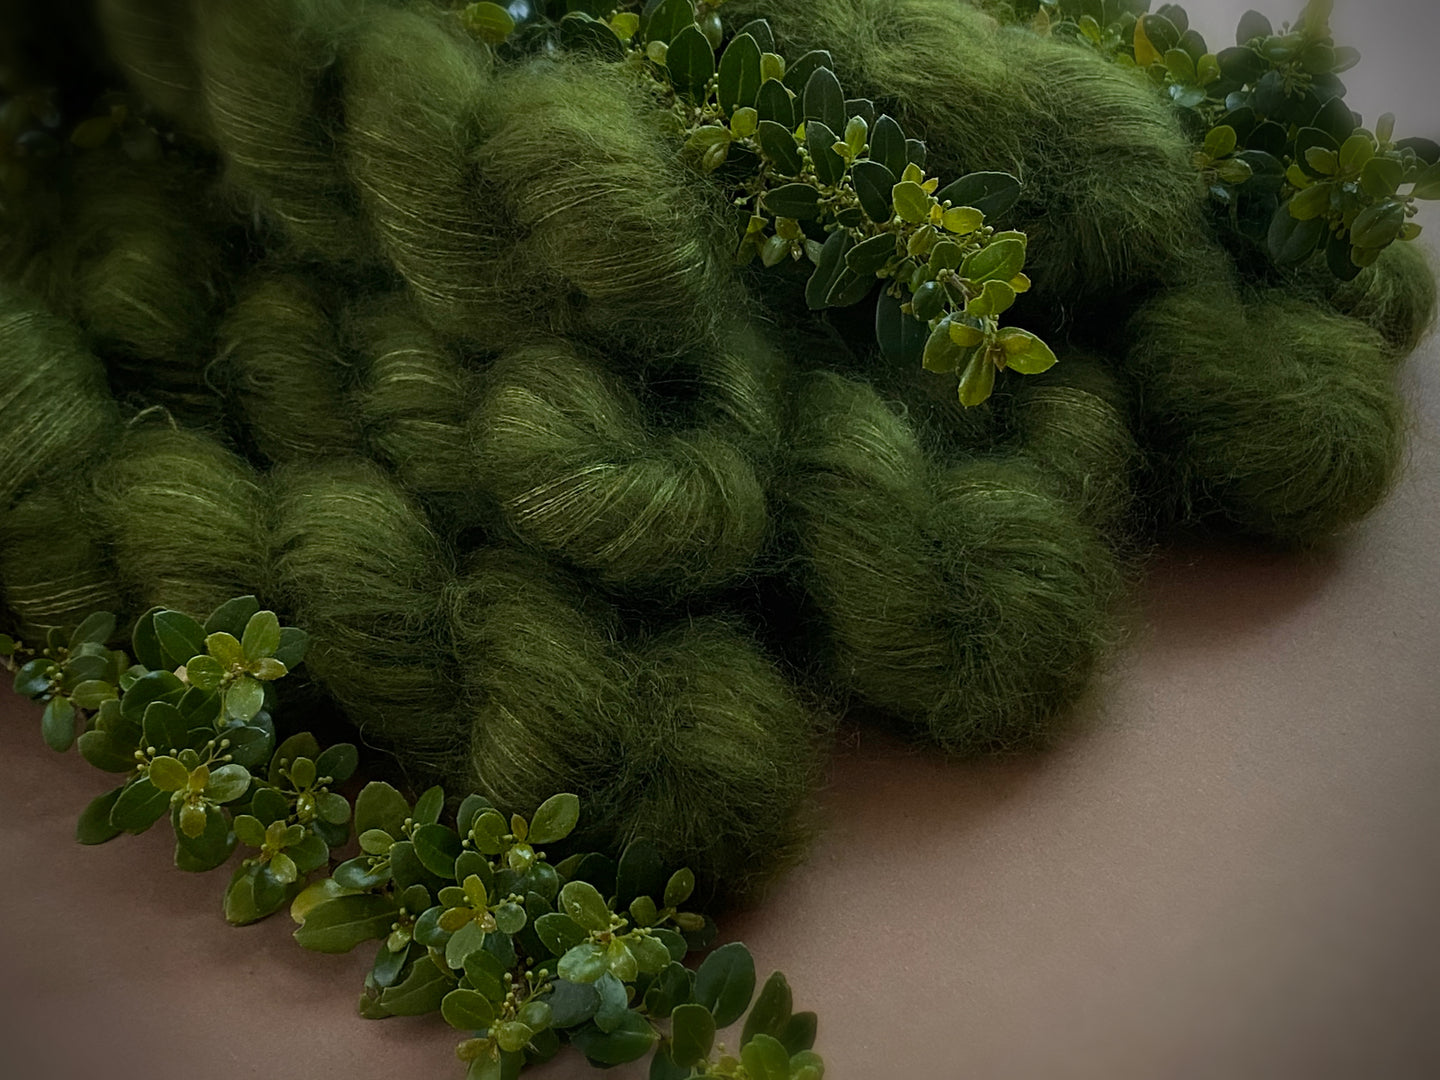 Greenstone. Lace Superfine Kid Mohair and Silk